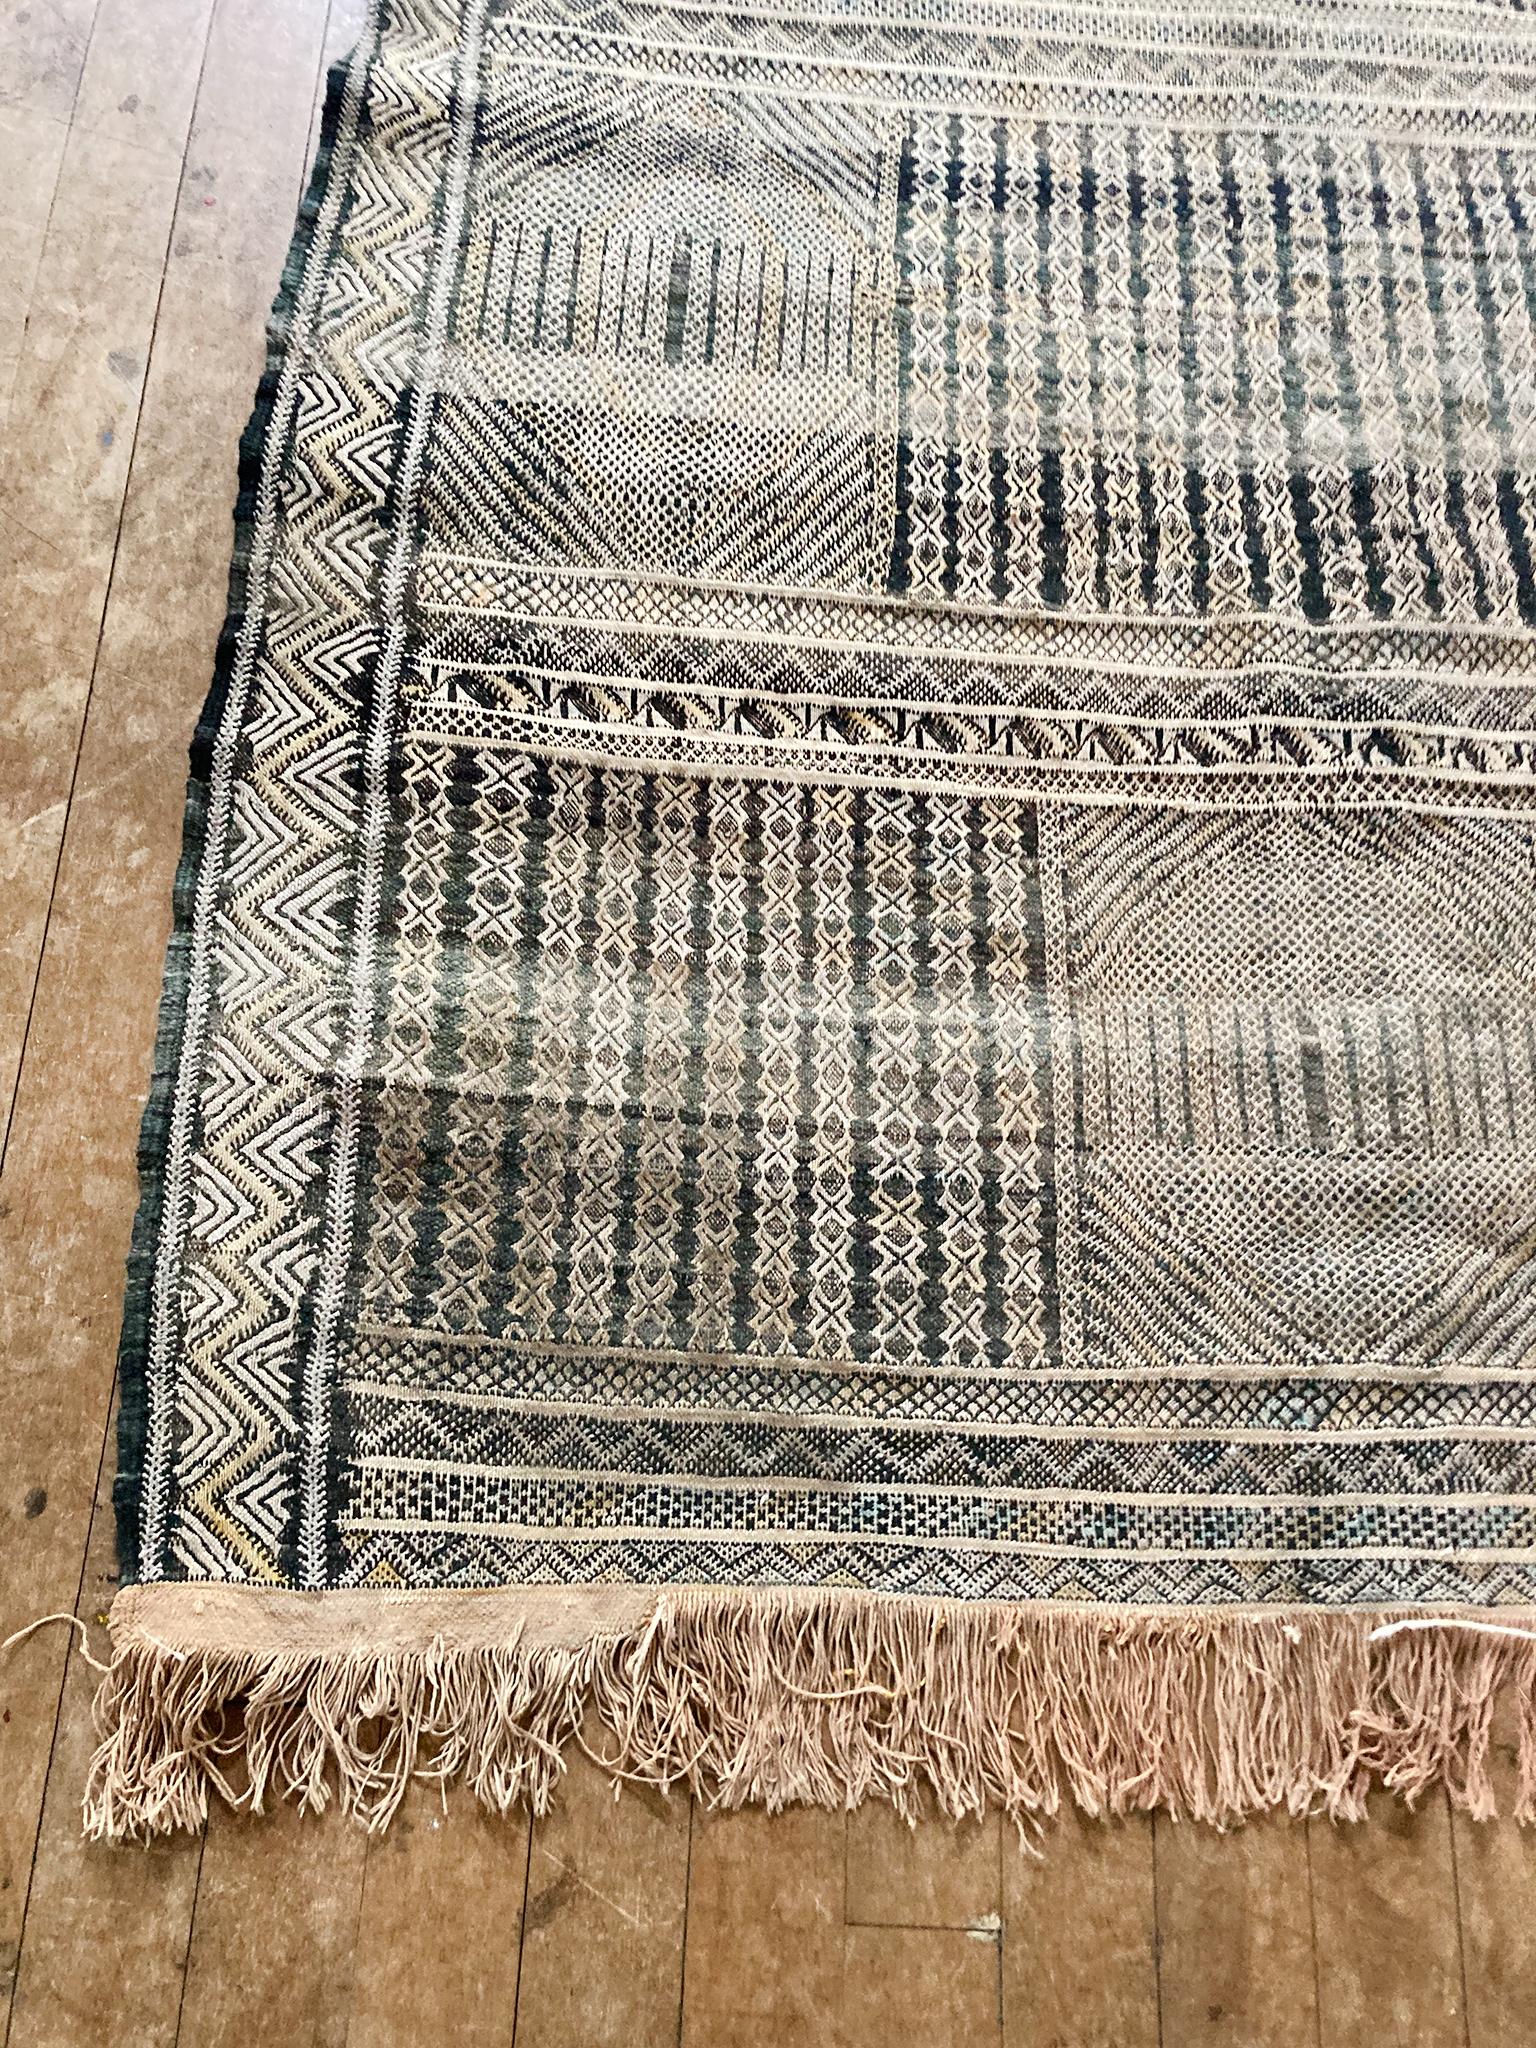 Hand-Woven 1960s Moroccan Area Rug